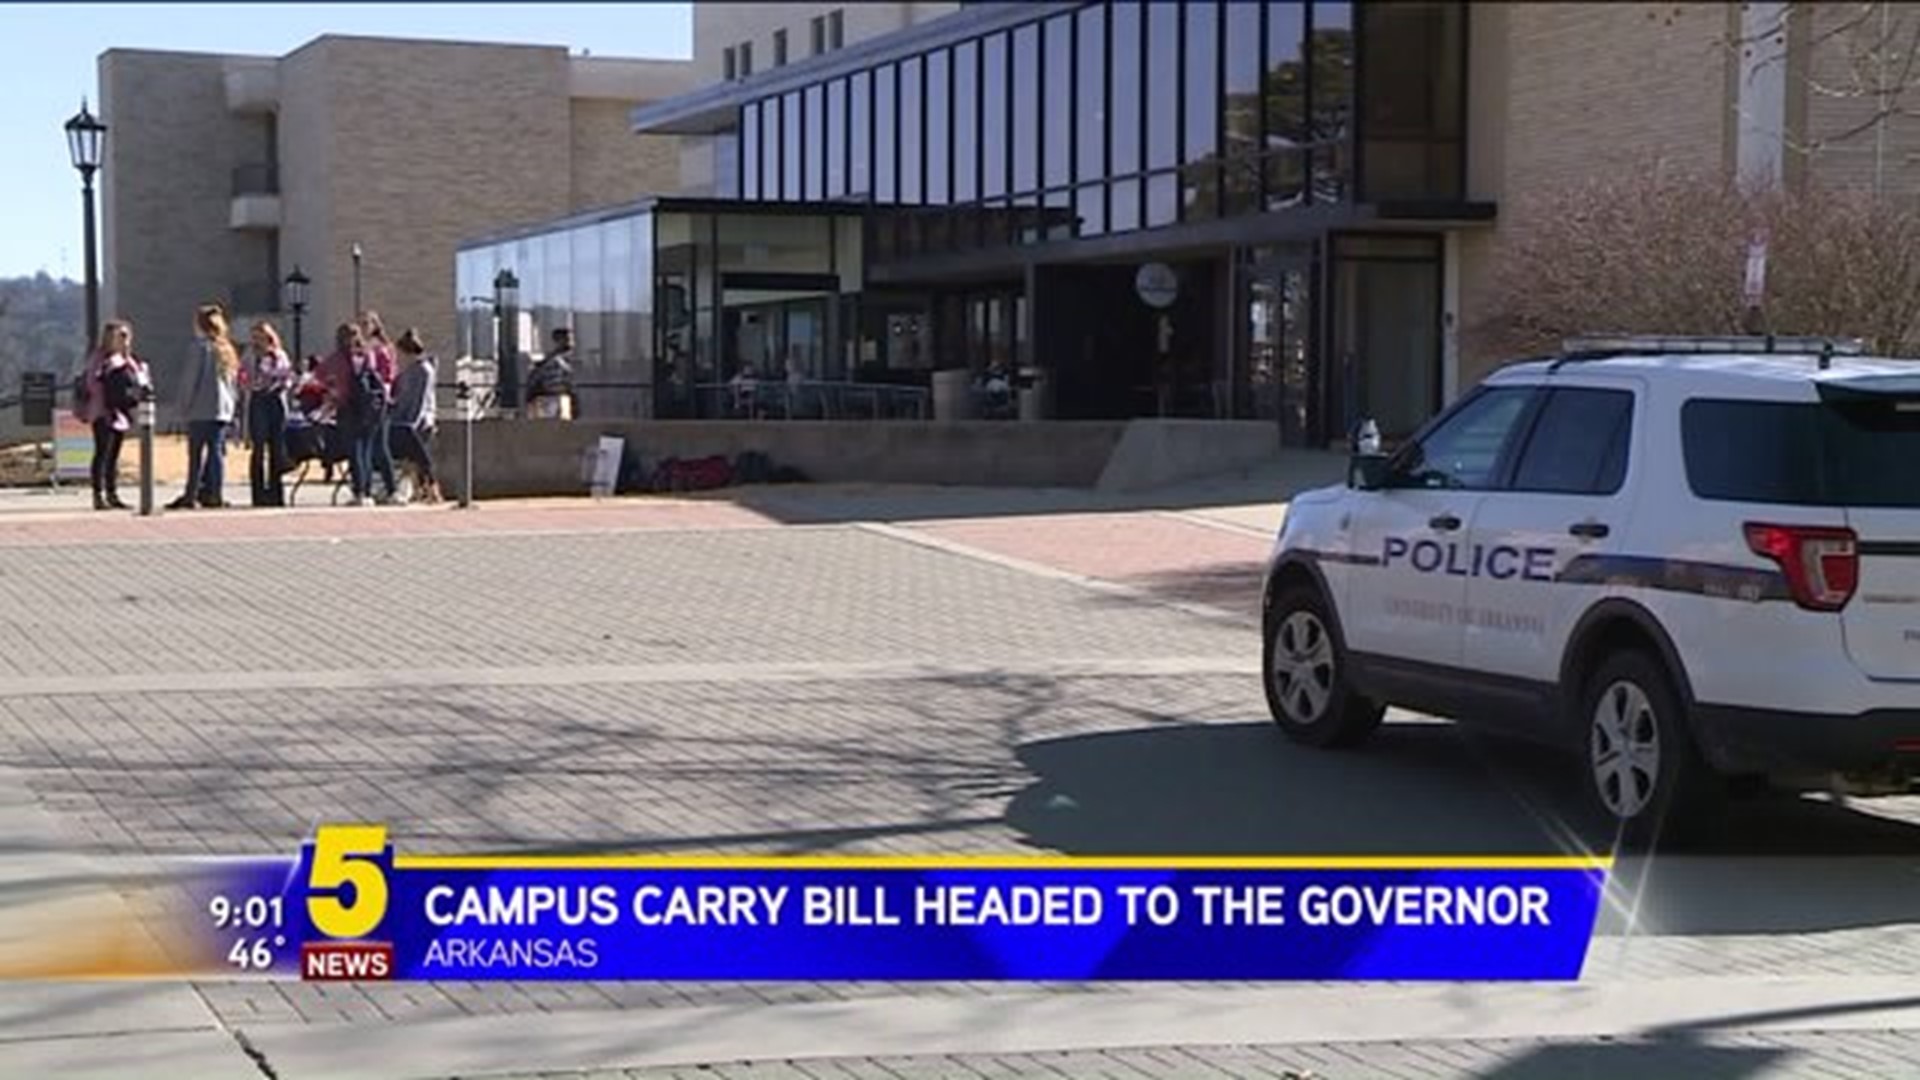 Campus Carry Bill